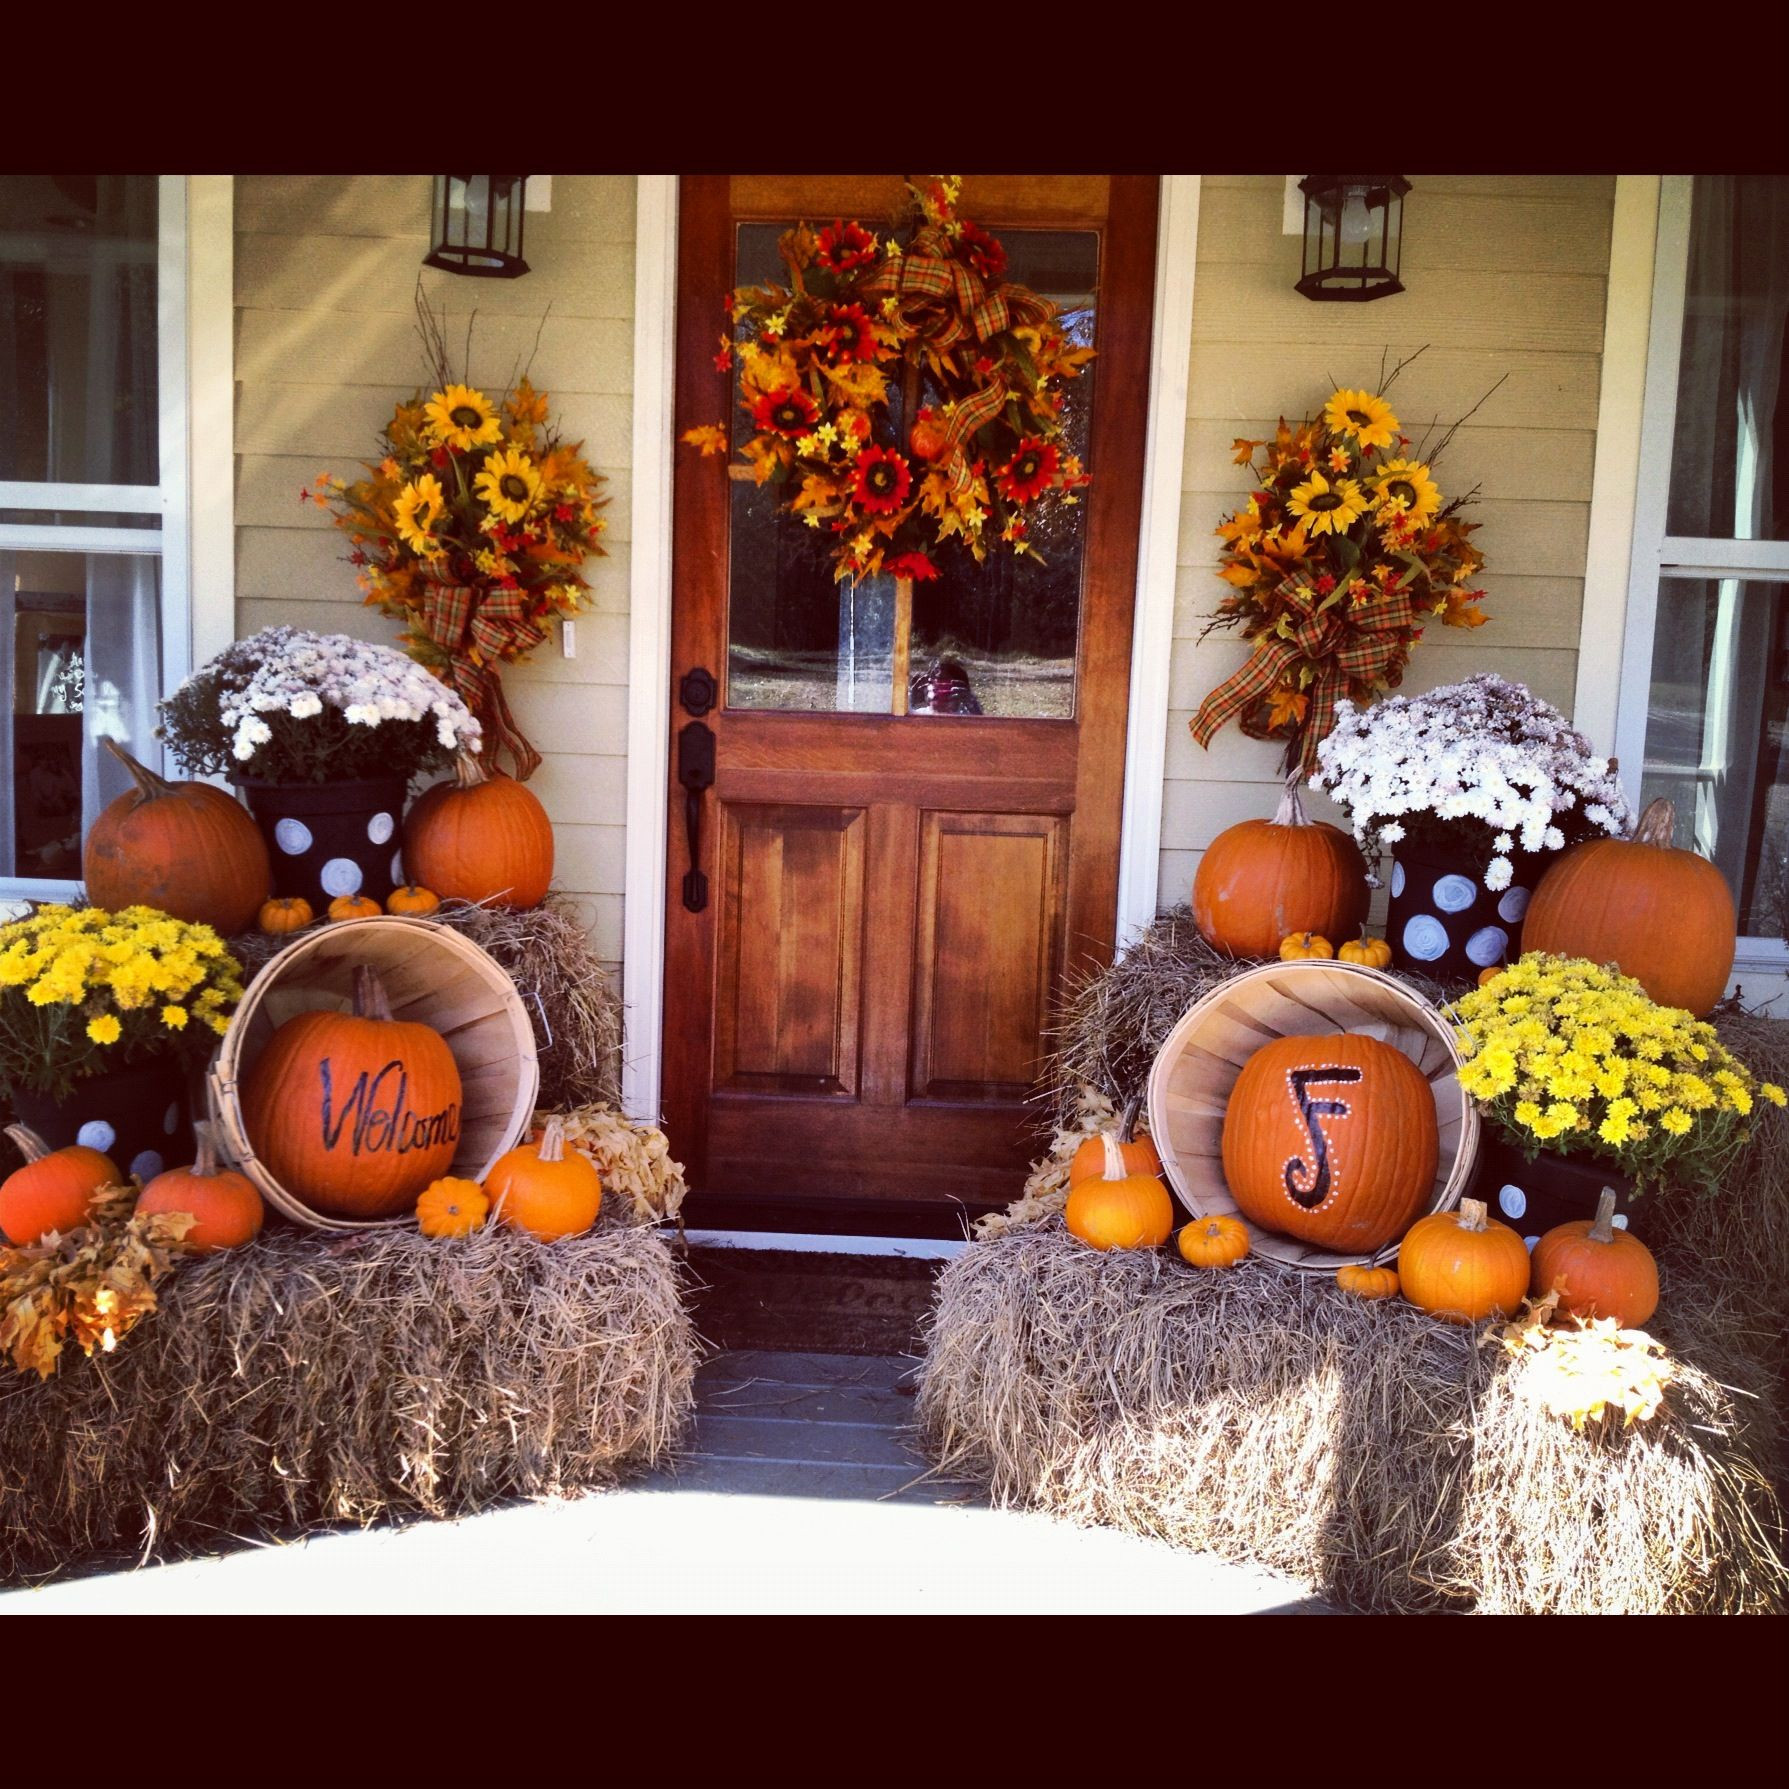 Fall Decor For Front Porch
 Love the decorations but really love the front door